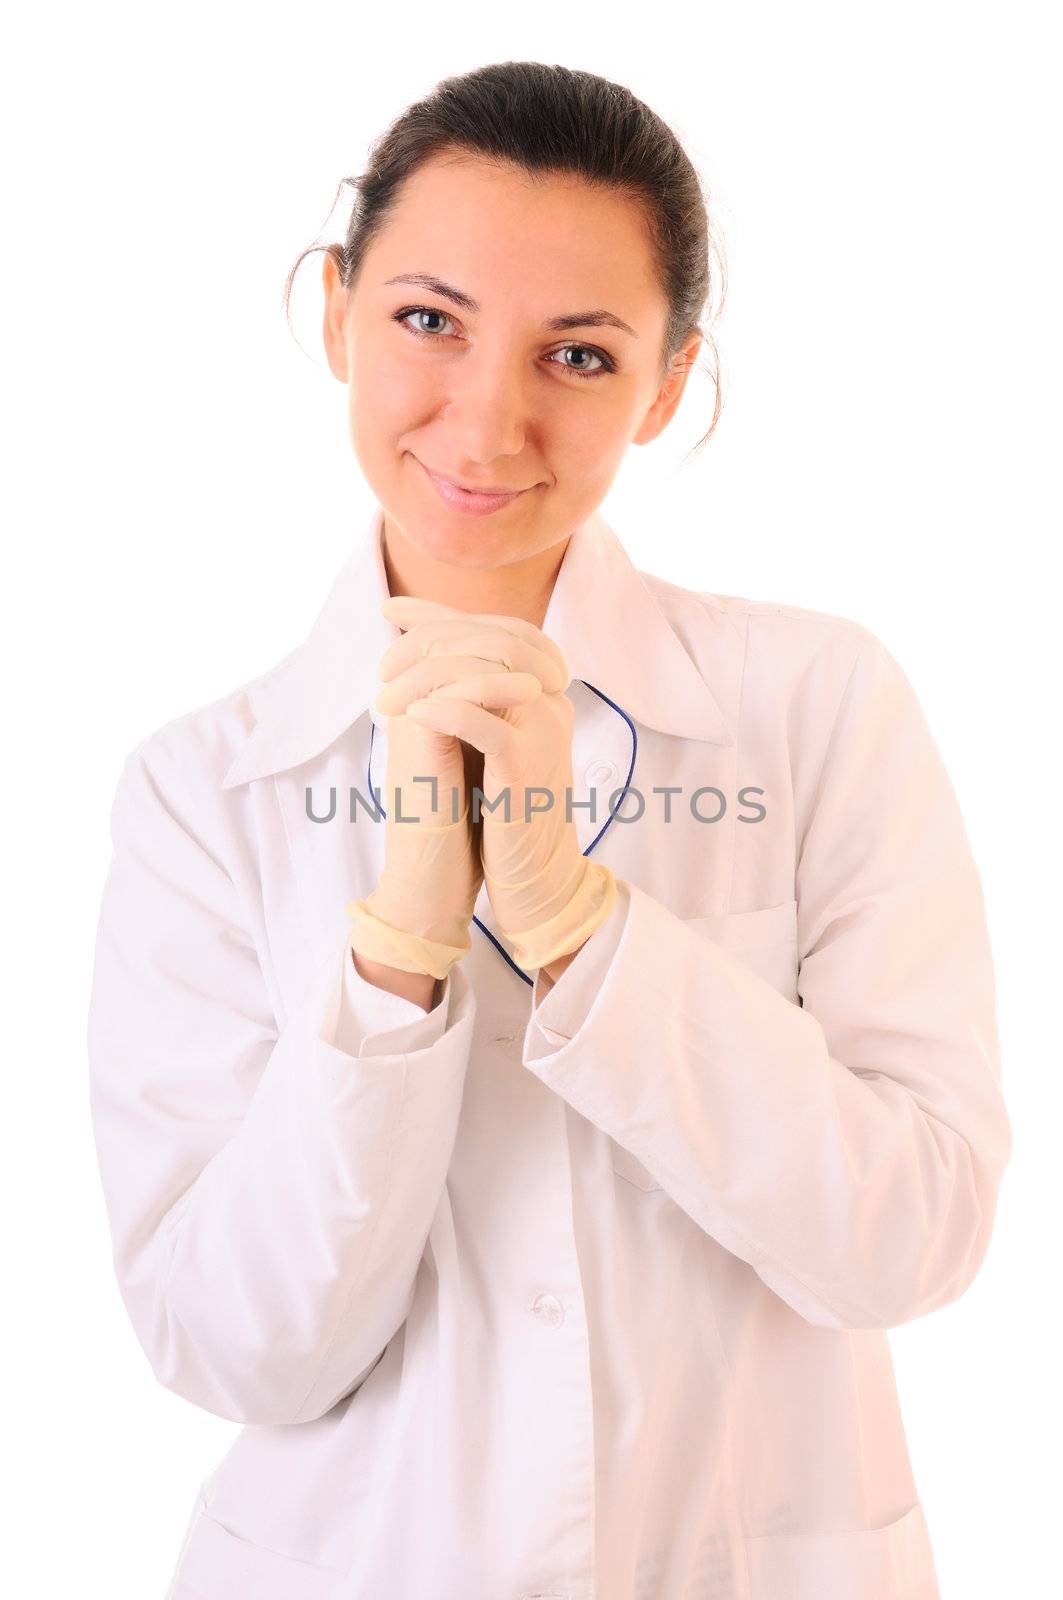 Woman in white coat and medical gloves. Isolated on white background.